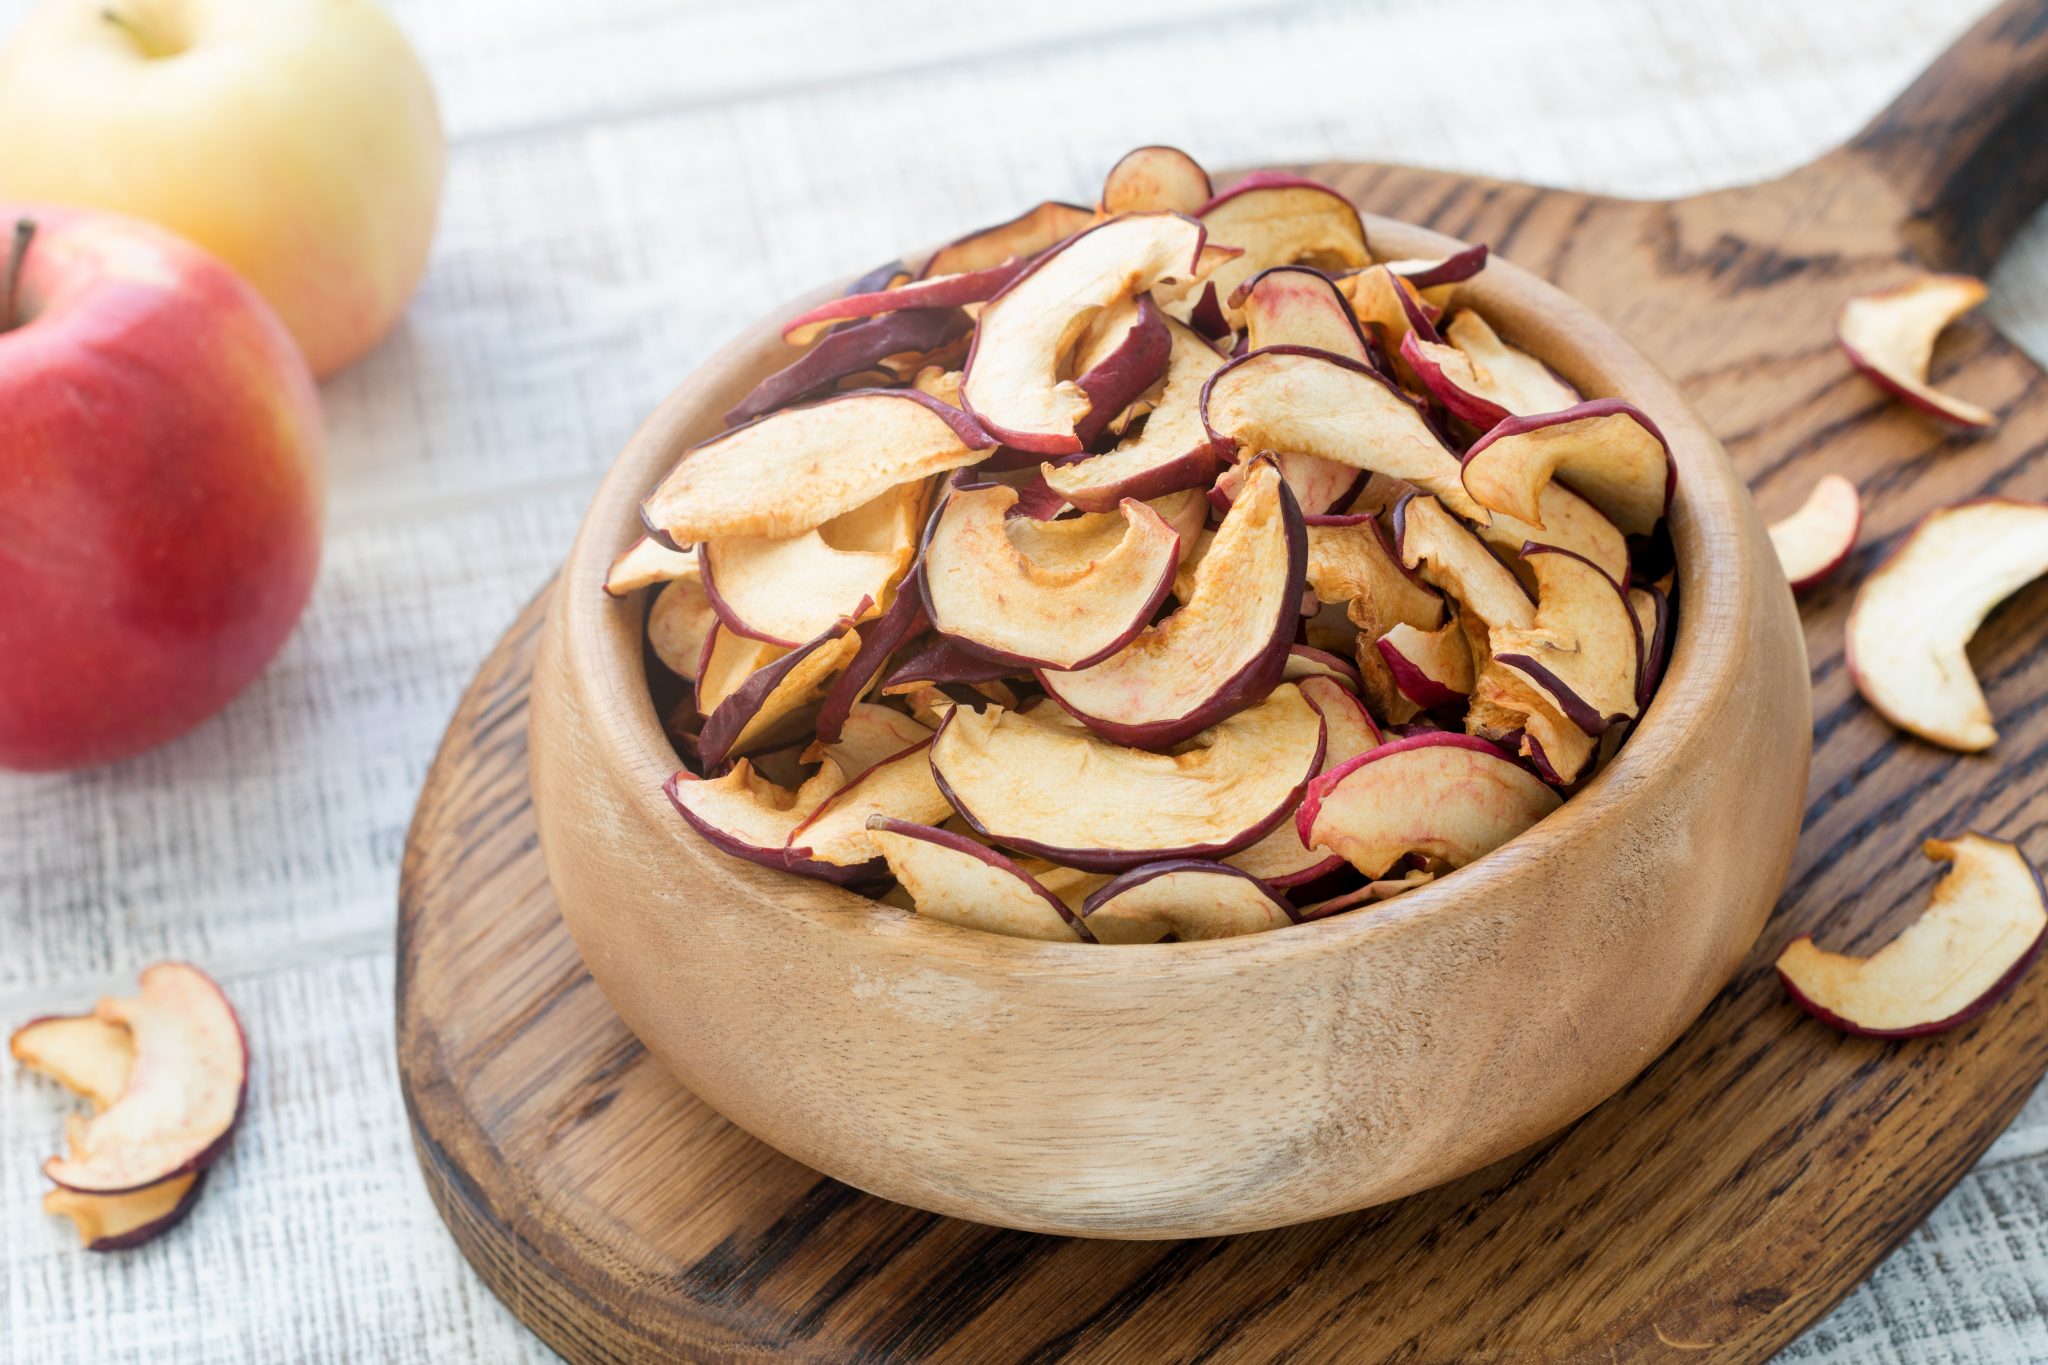 Homemade dried apples or apple chips in a wooden bowl, closeup view